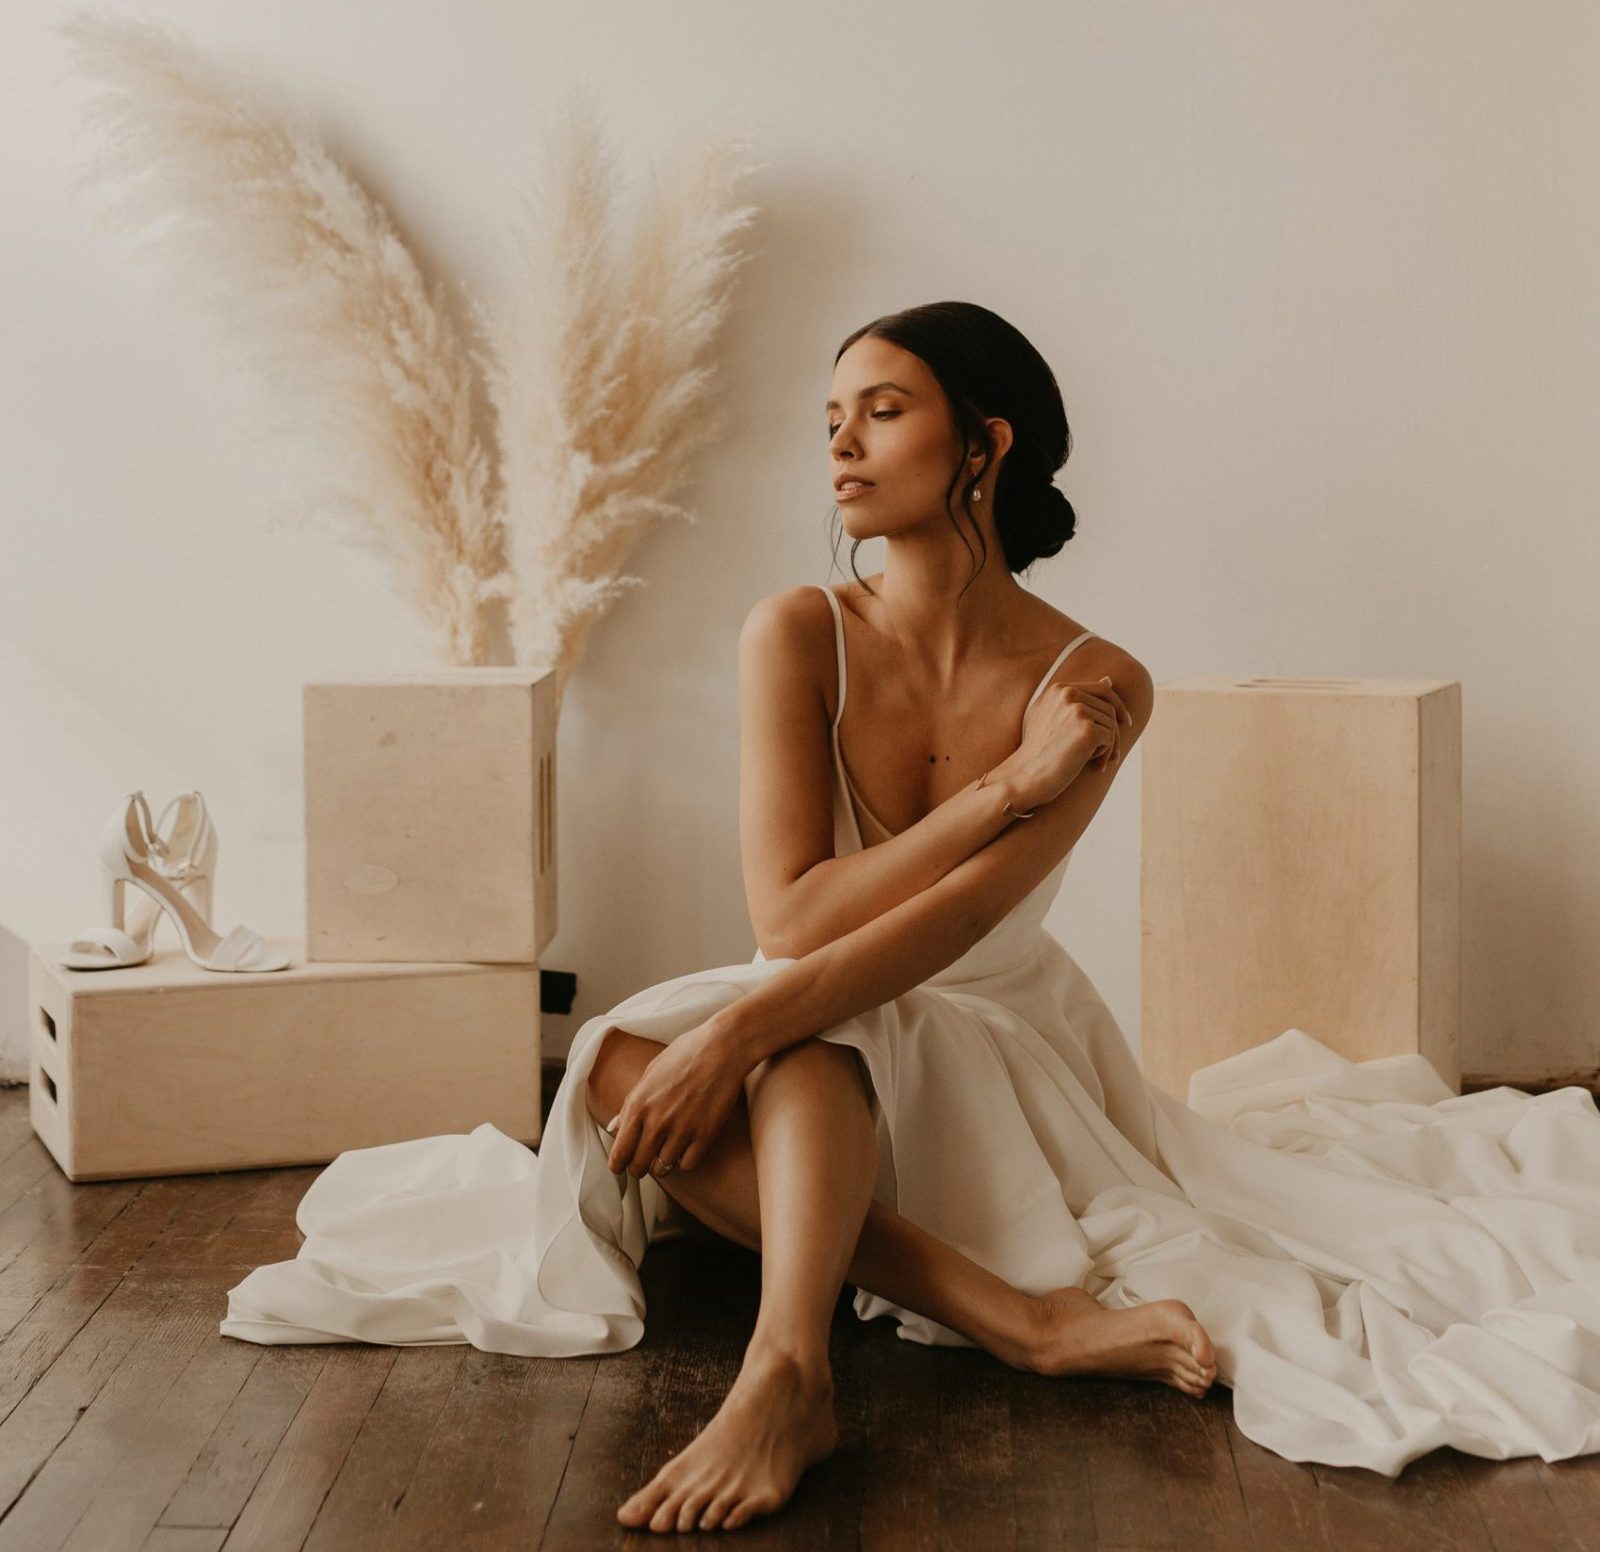 Bridal Minimalism Feature on Bronte Bride: Delica Bridal Shares All About New Bridal Trends & Dress Shopping During Covid, wedding dress shopping, boho bride